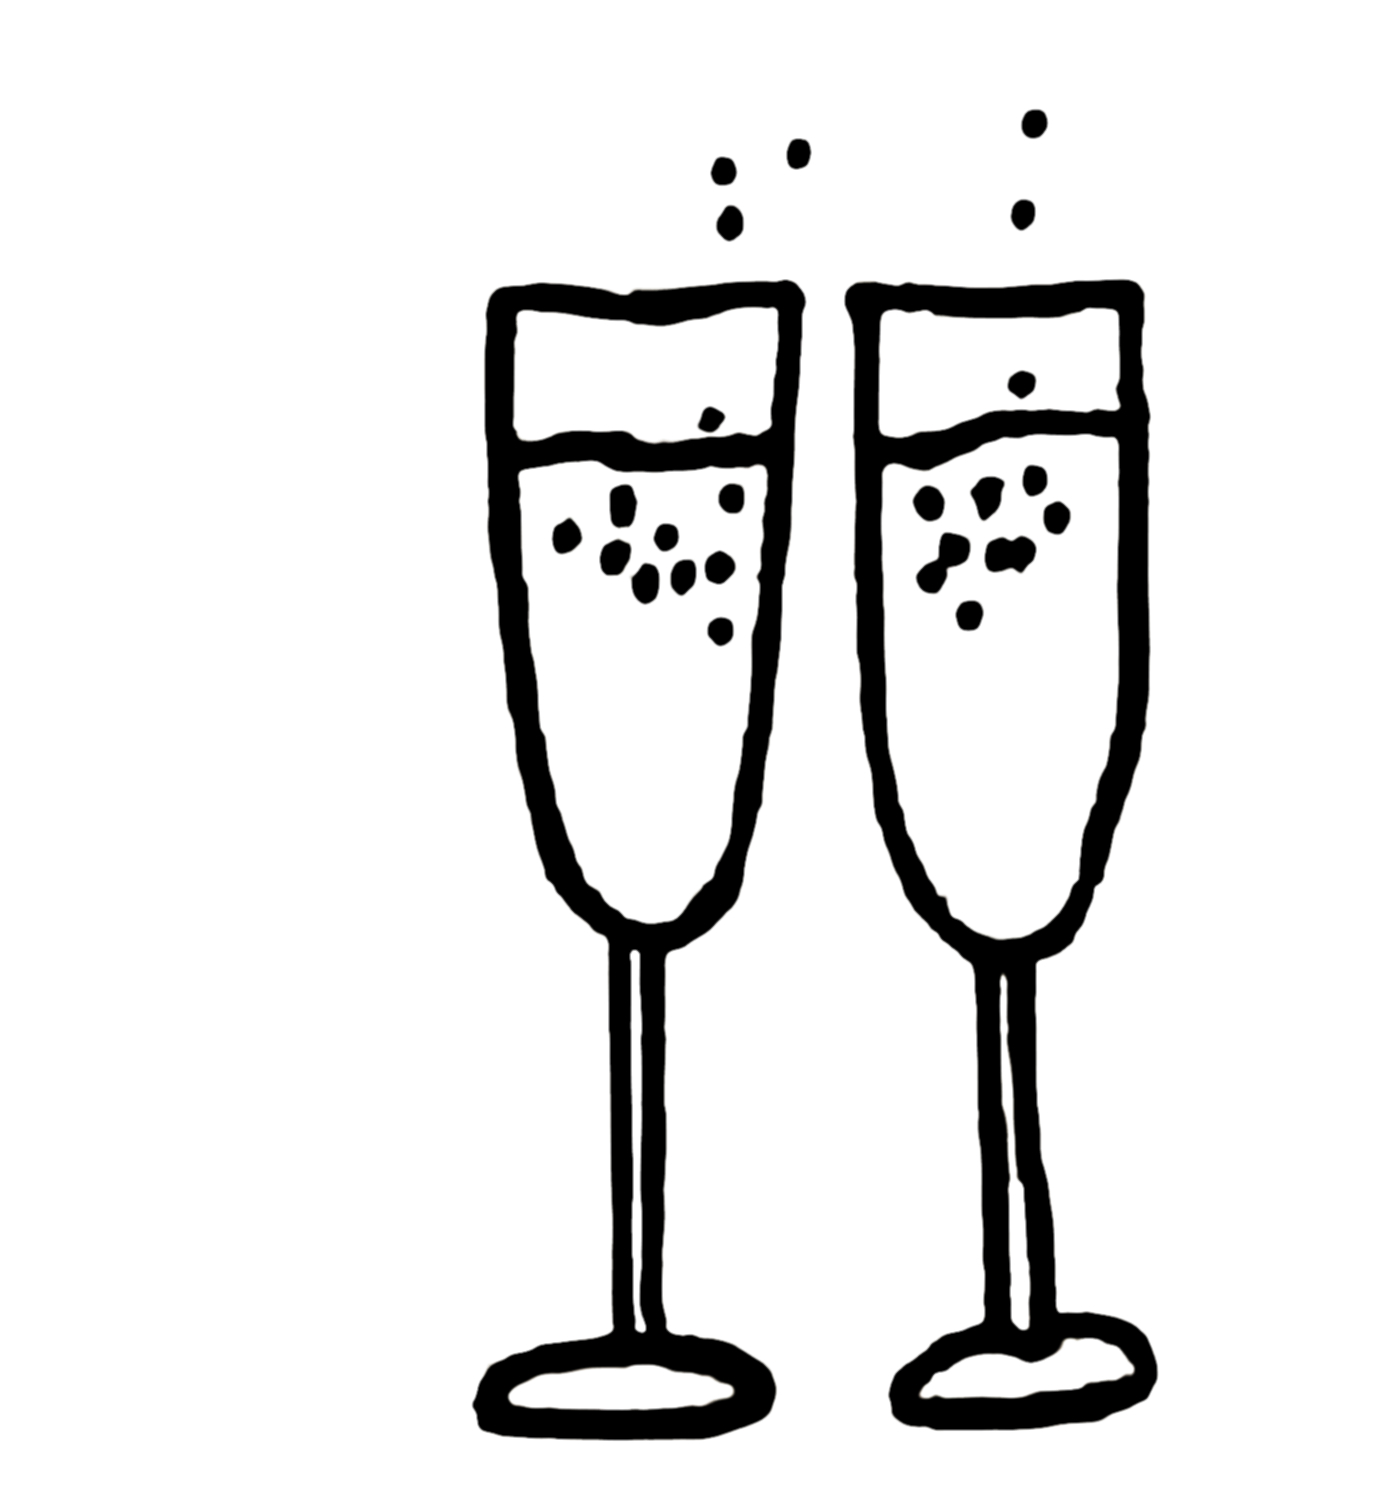 Champagne glass images clipart